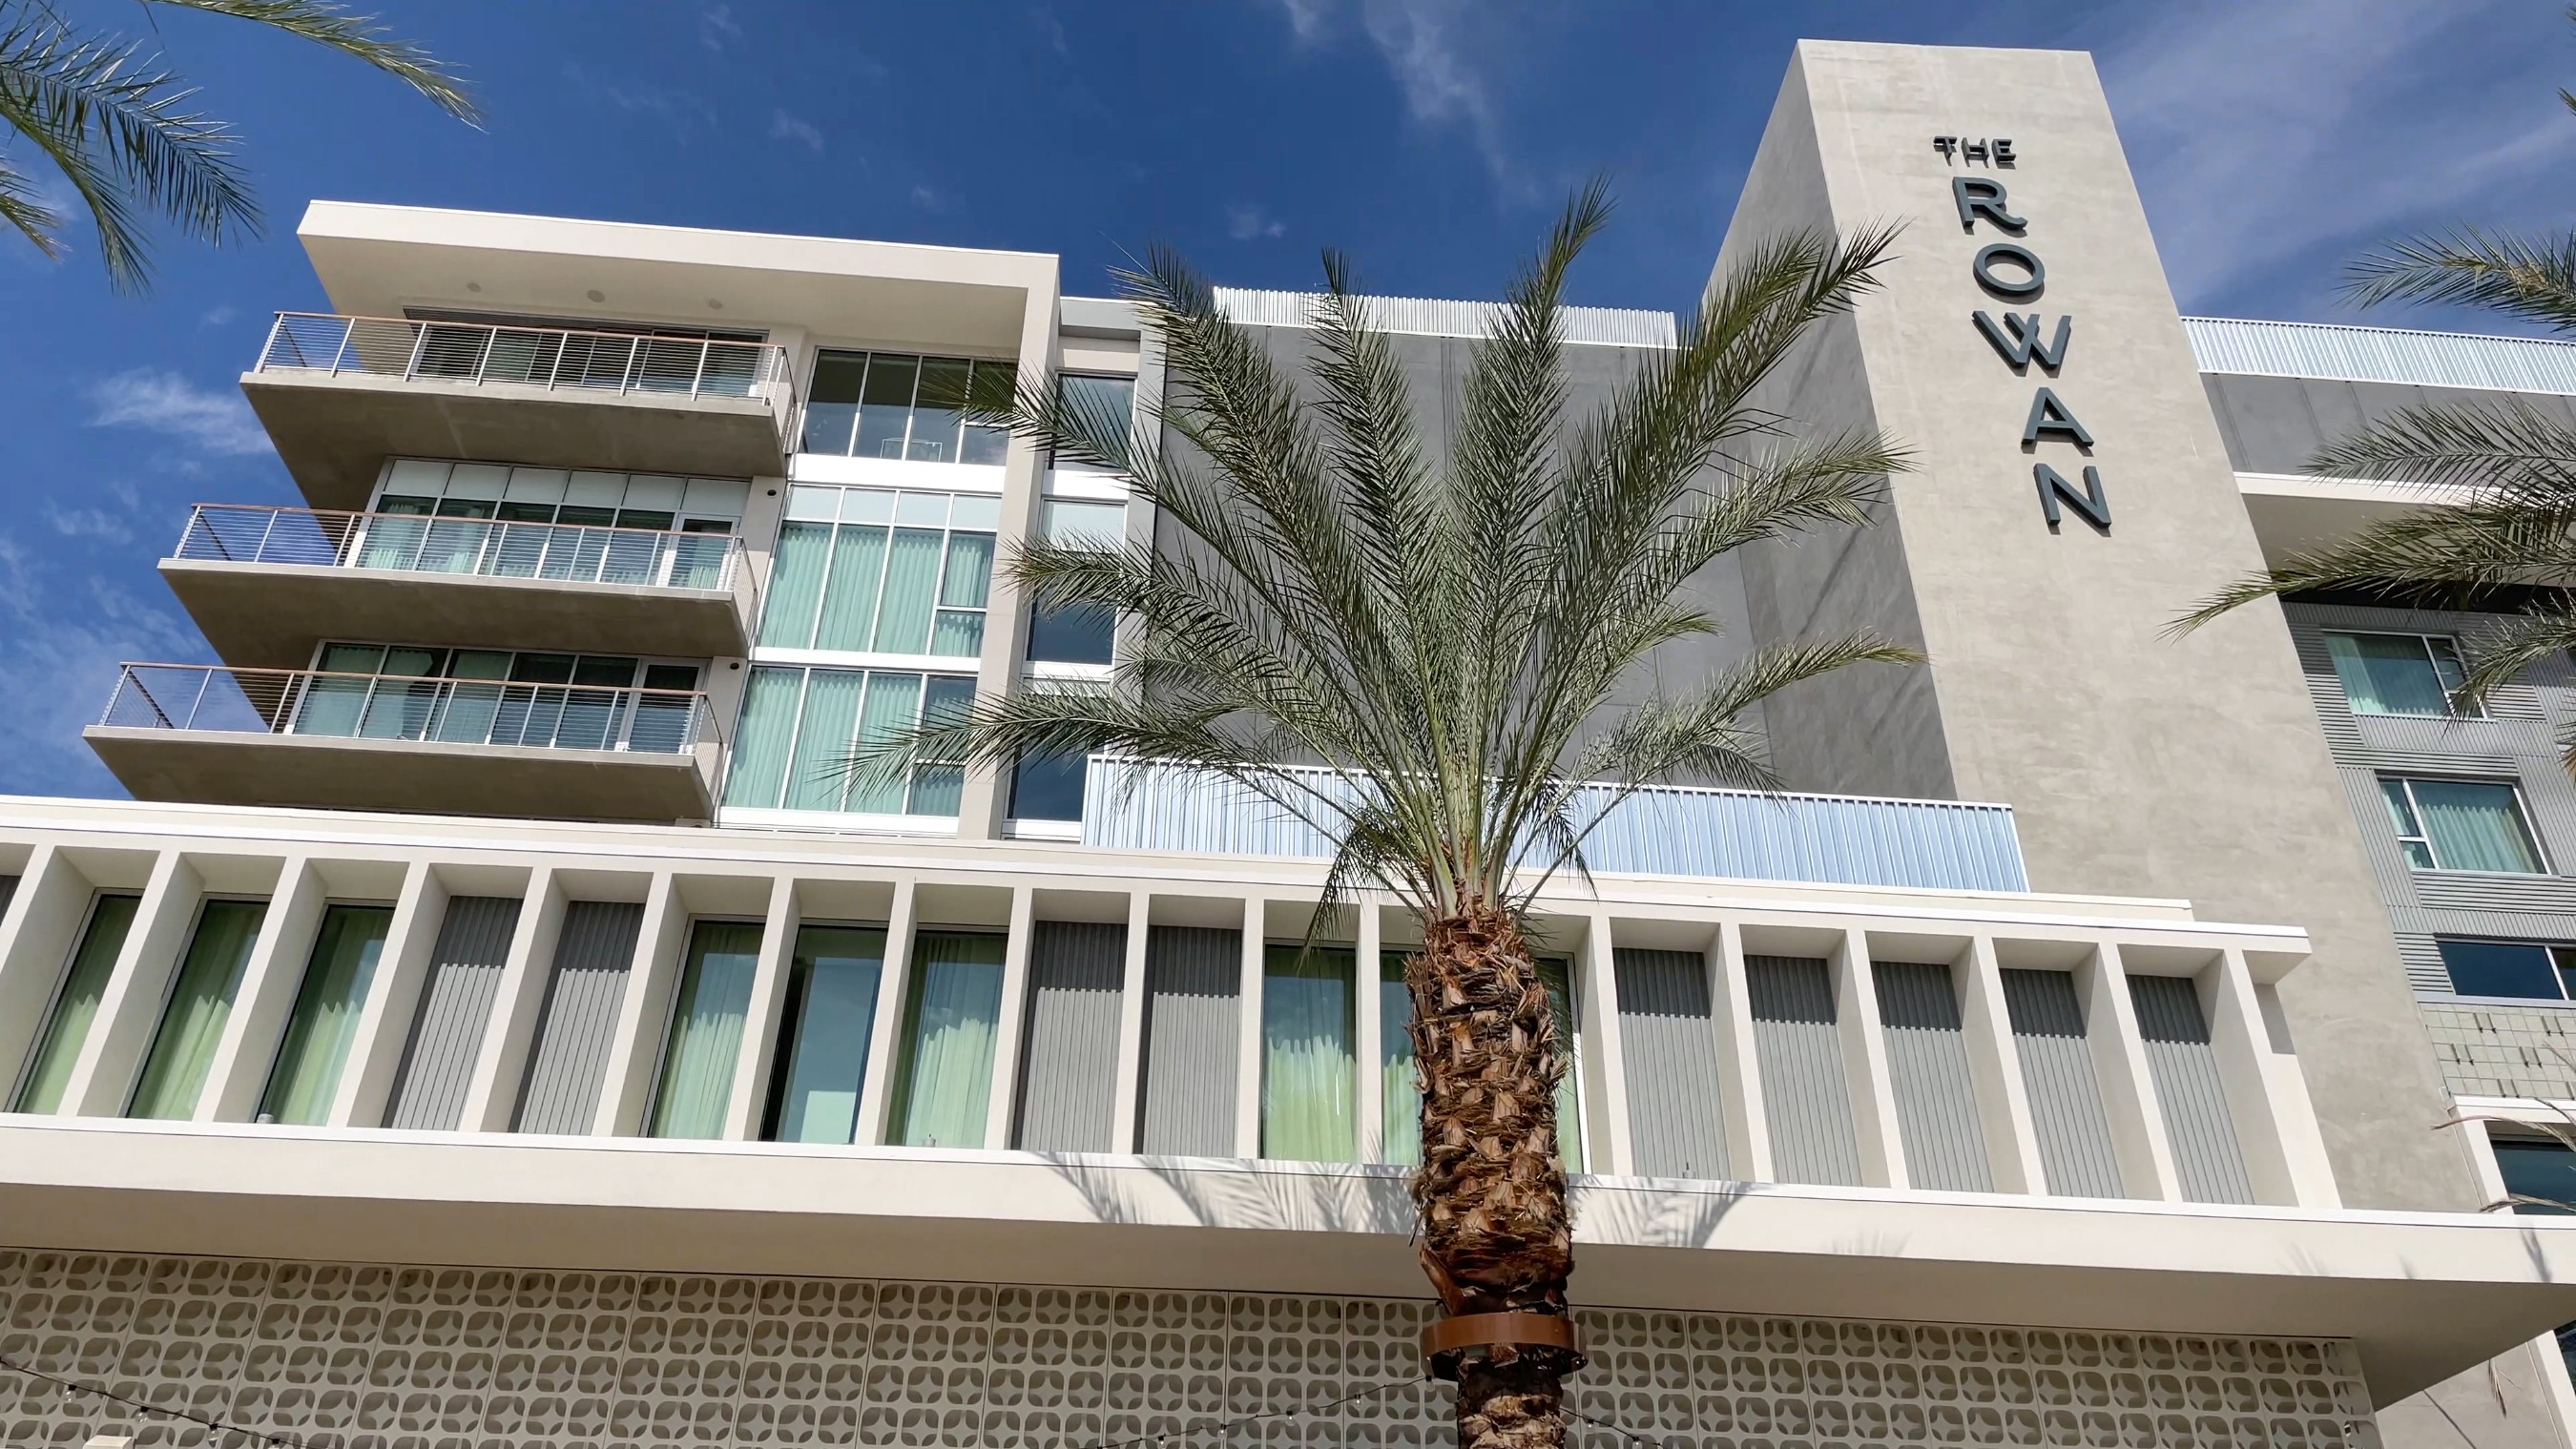 Kimpton Rowan in Palm Springs is the pilot for the hotel room of the future by IHG Hotels & Resorts and Josh.ai